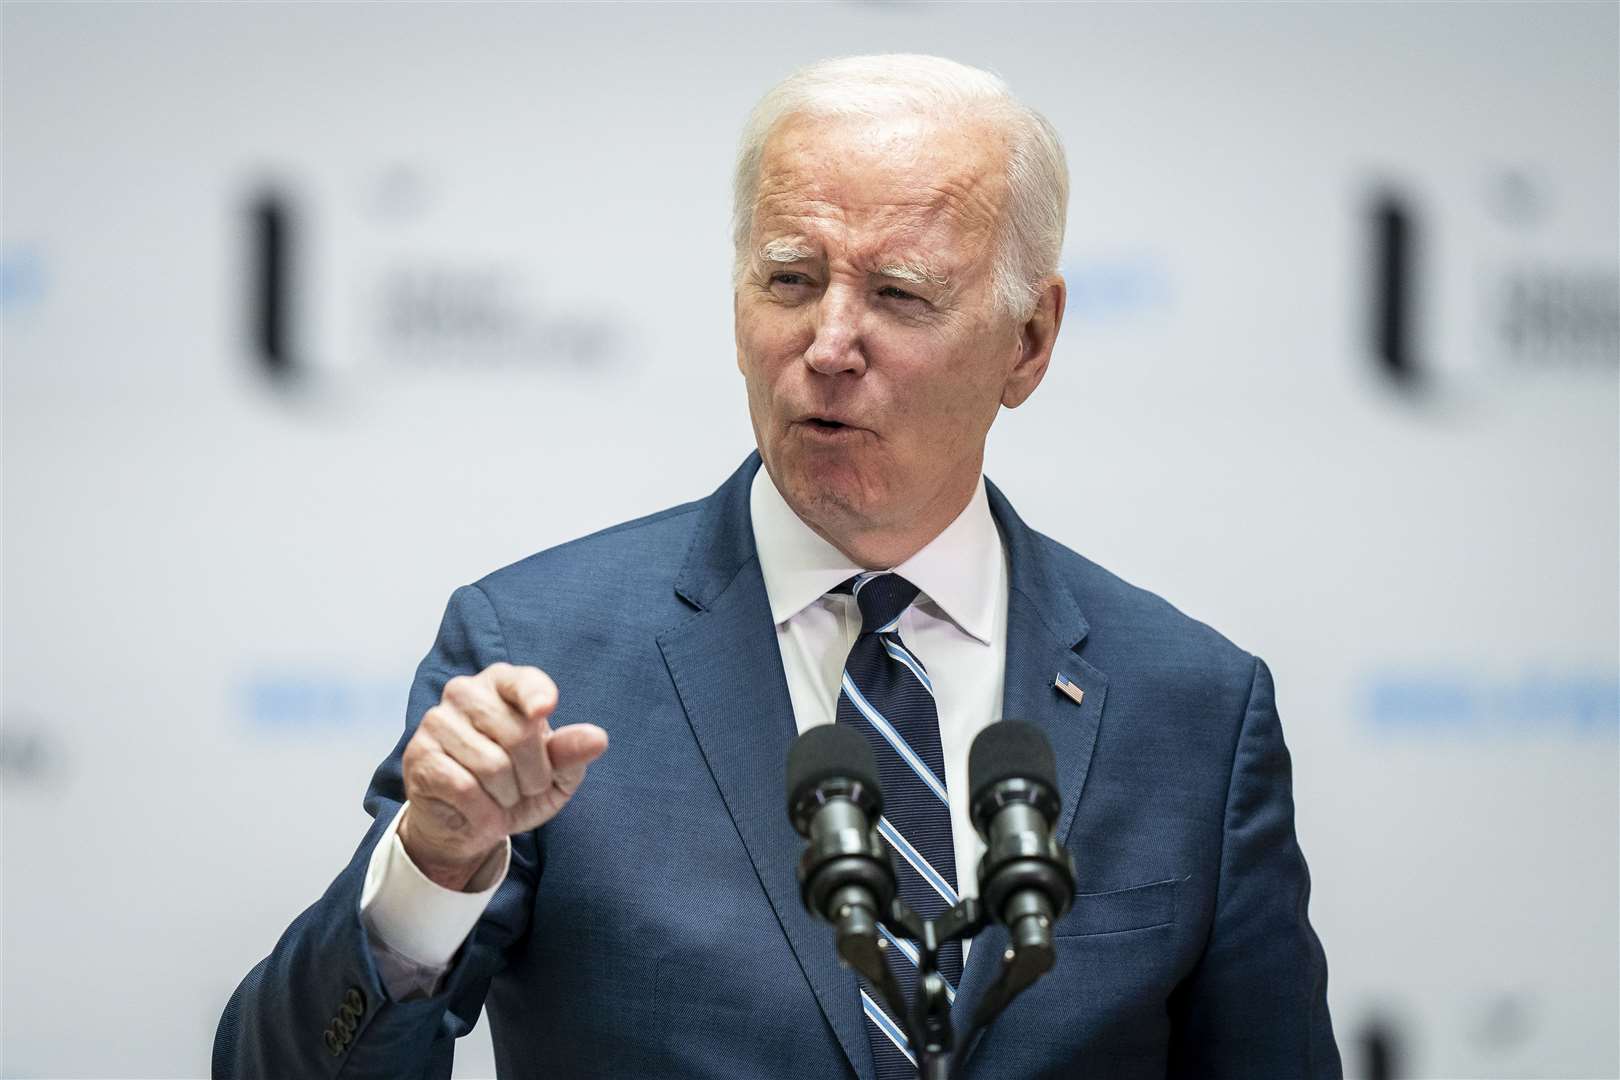 Joe Biden referenced the attack in his speech at Ulster University (Aaron Chown/PA)